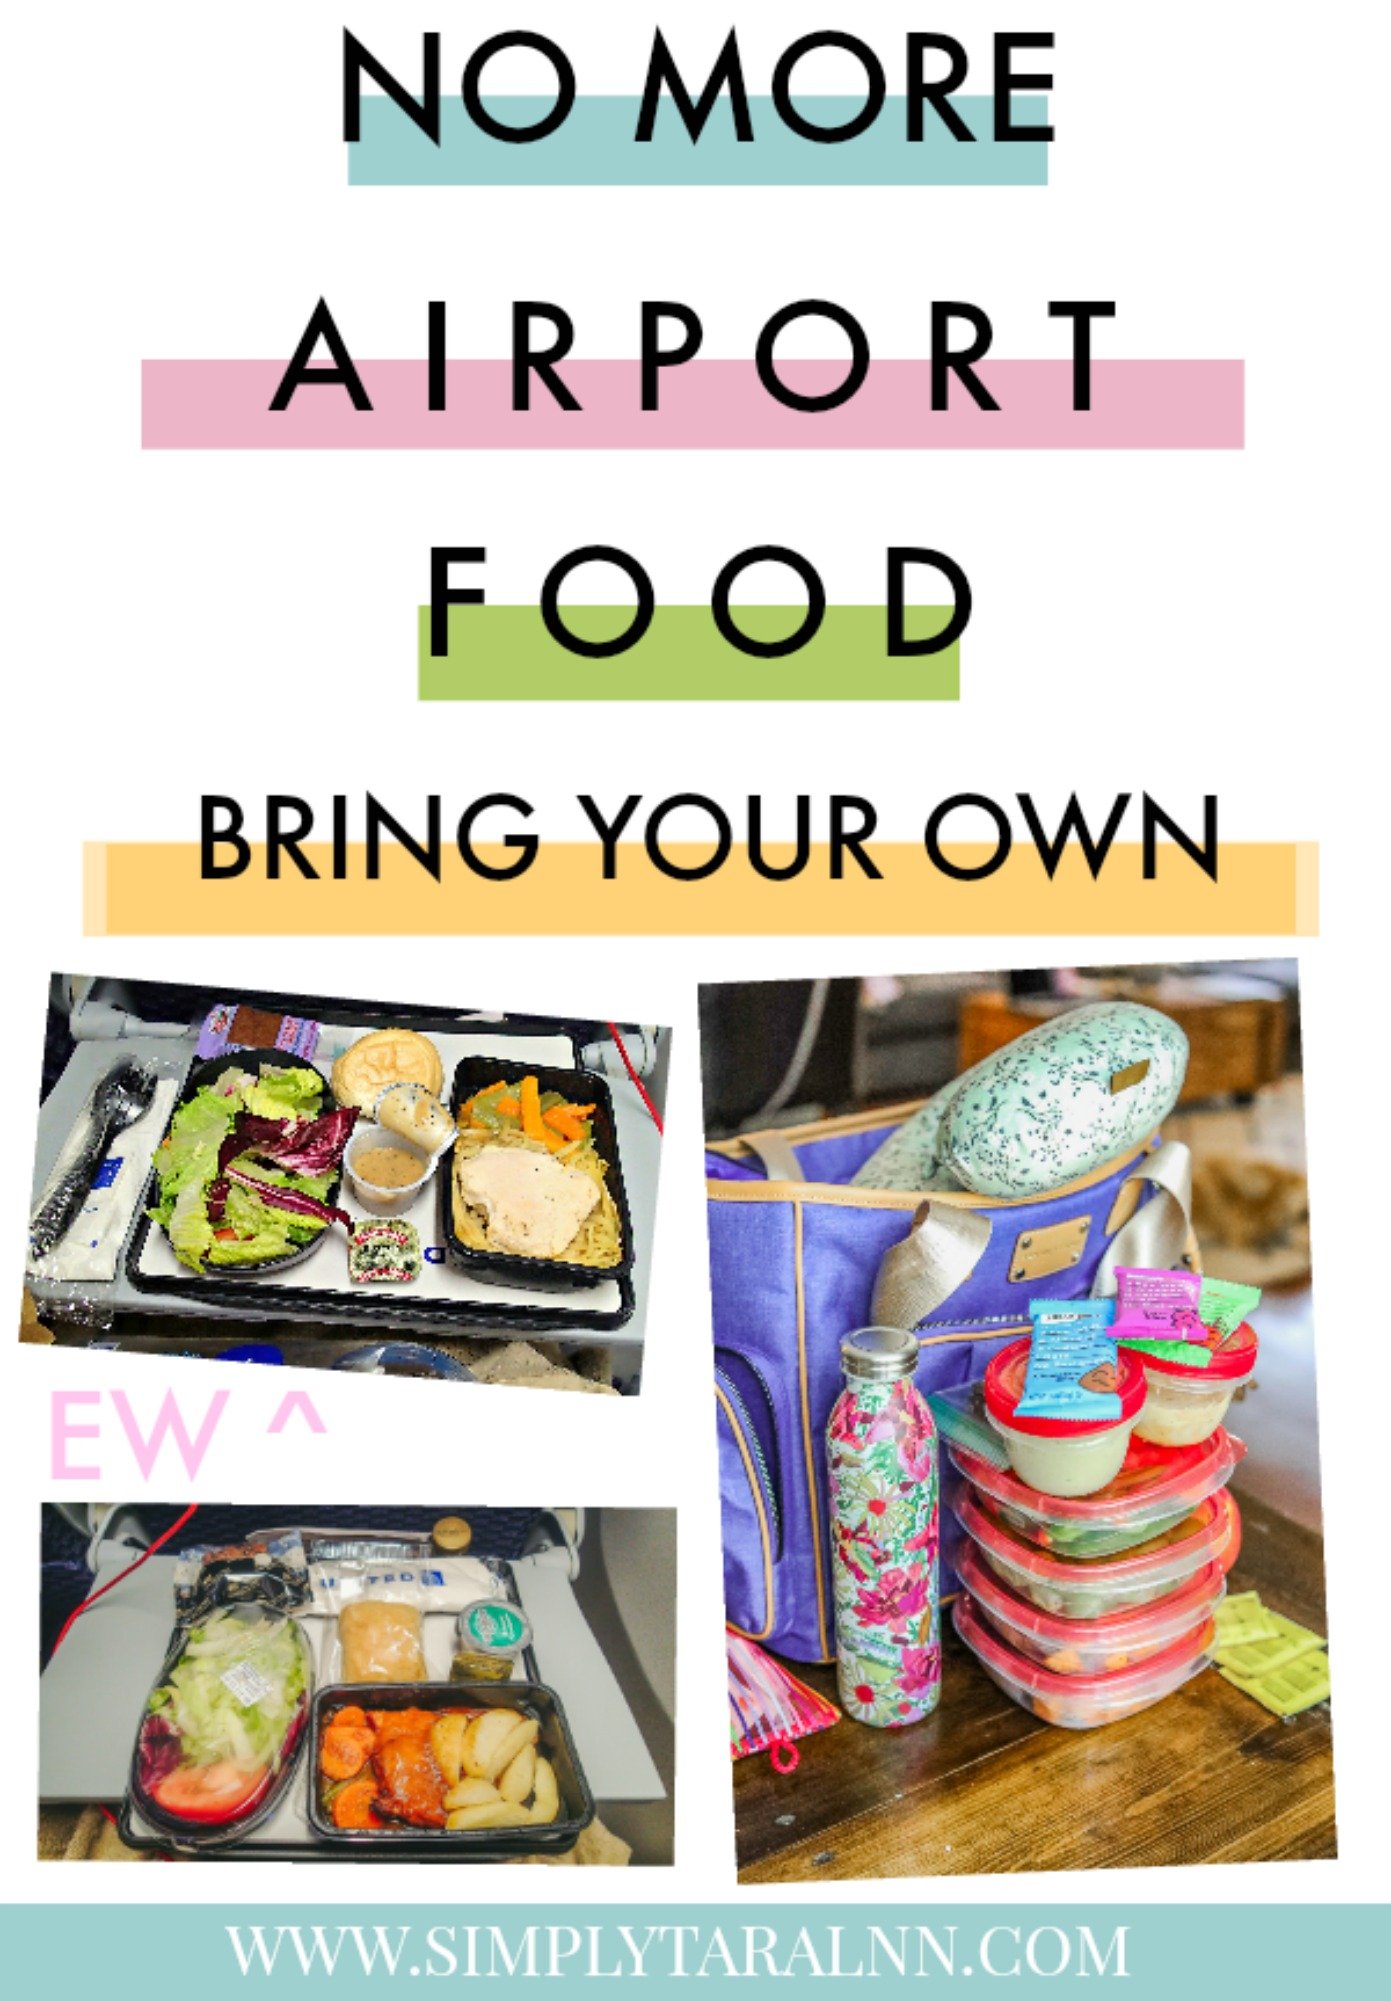 Two TSA-Approved Airport Travel Meals For Your Long Trip - Simply Taralynn